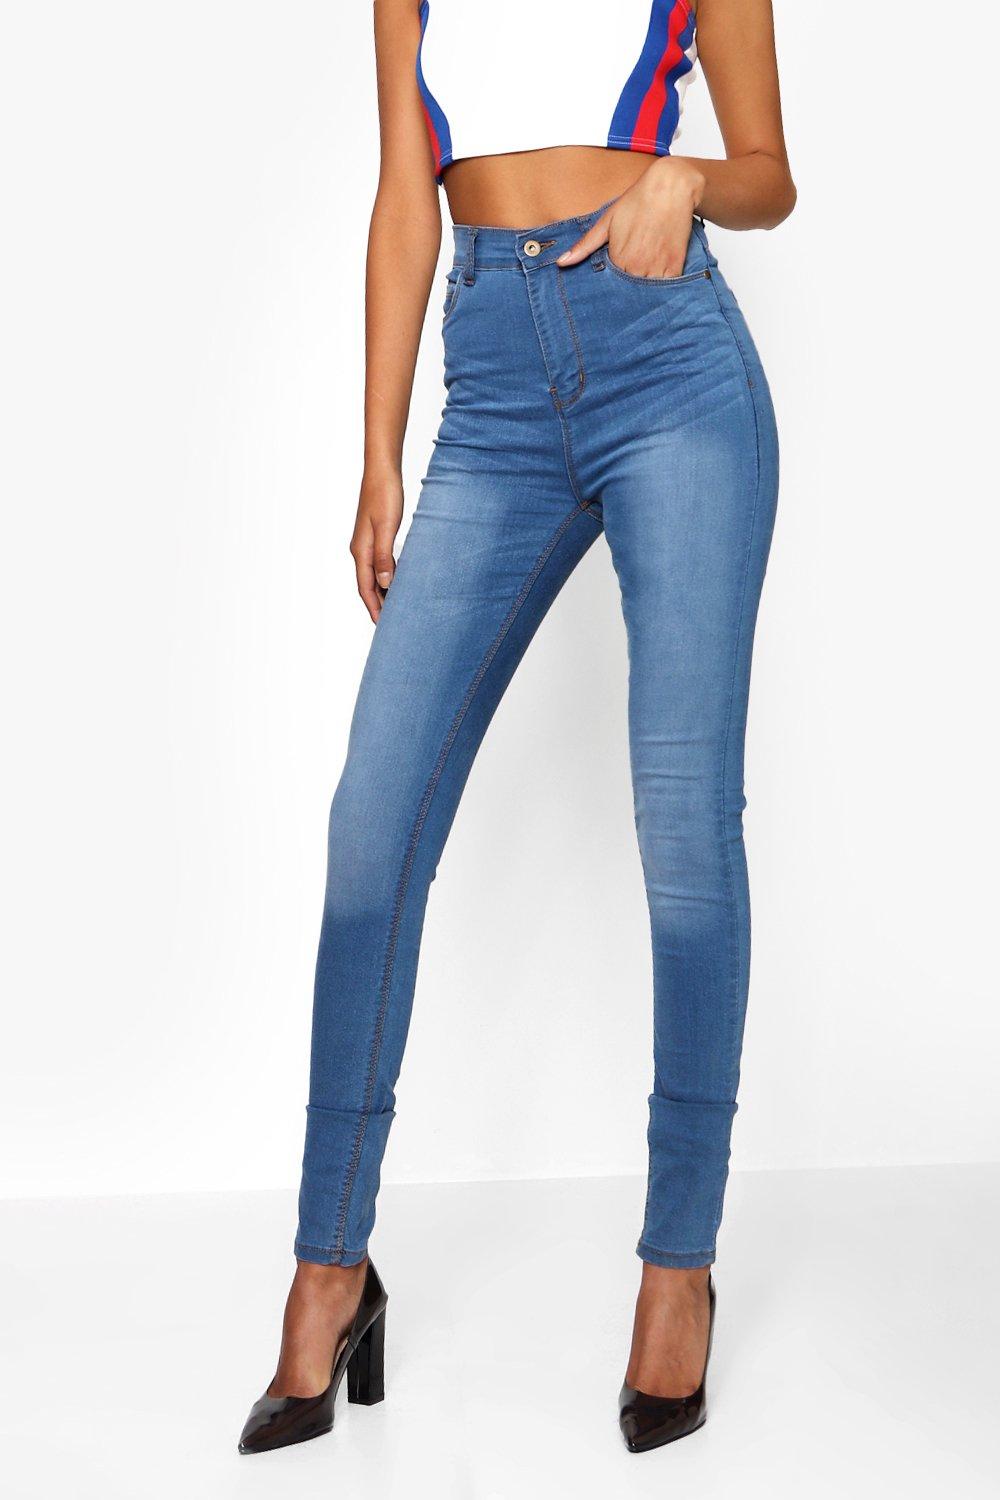 Washed Out High Waisted Denim Jeggings